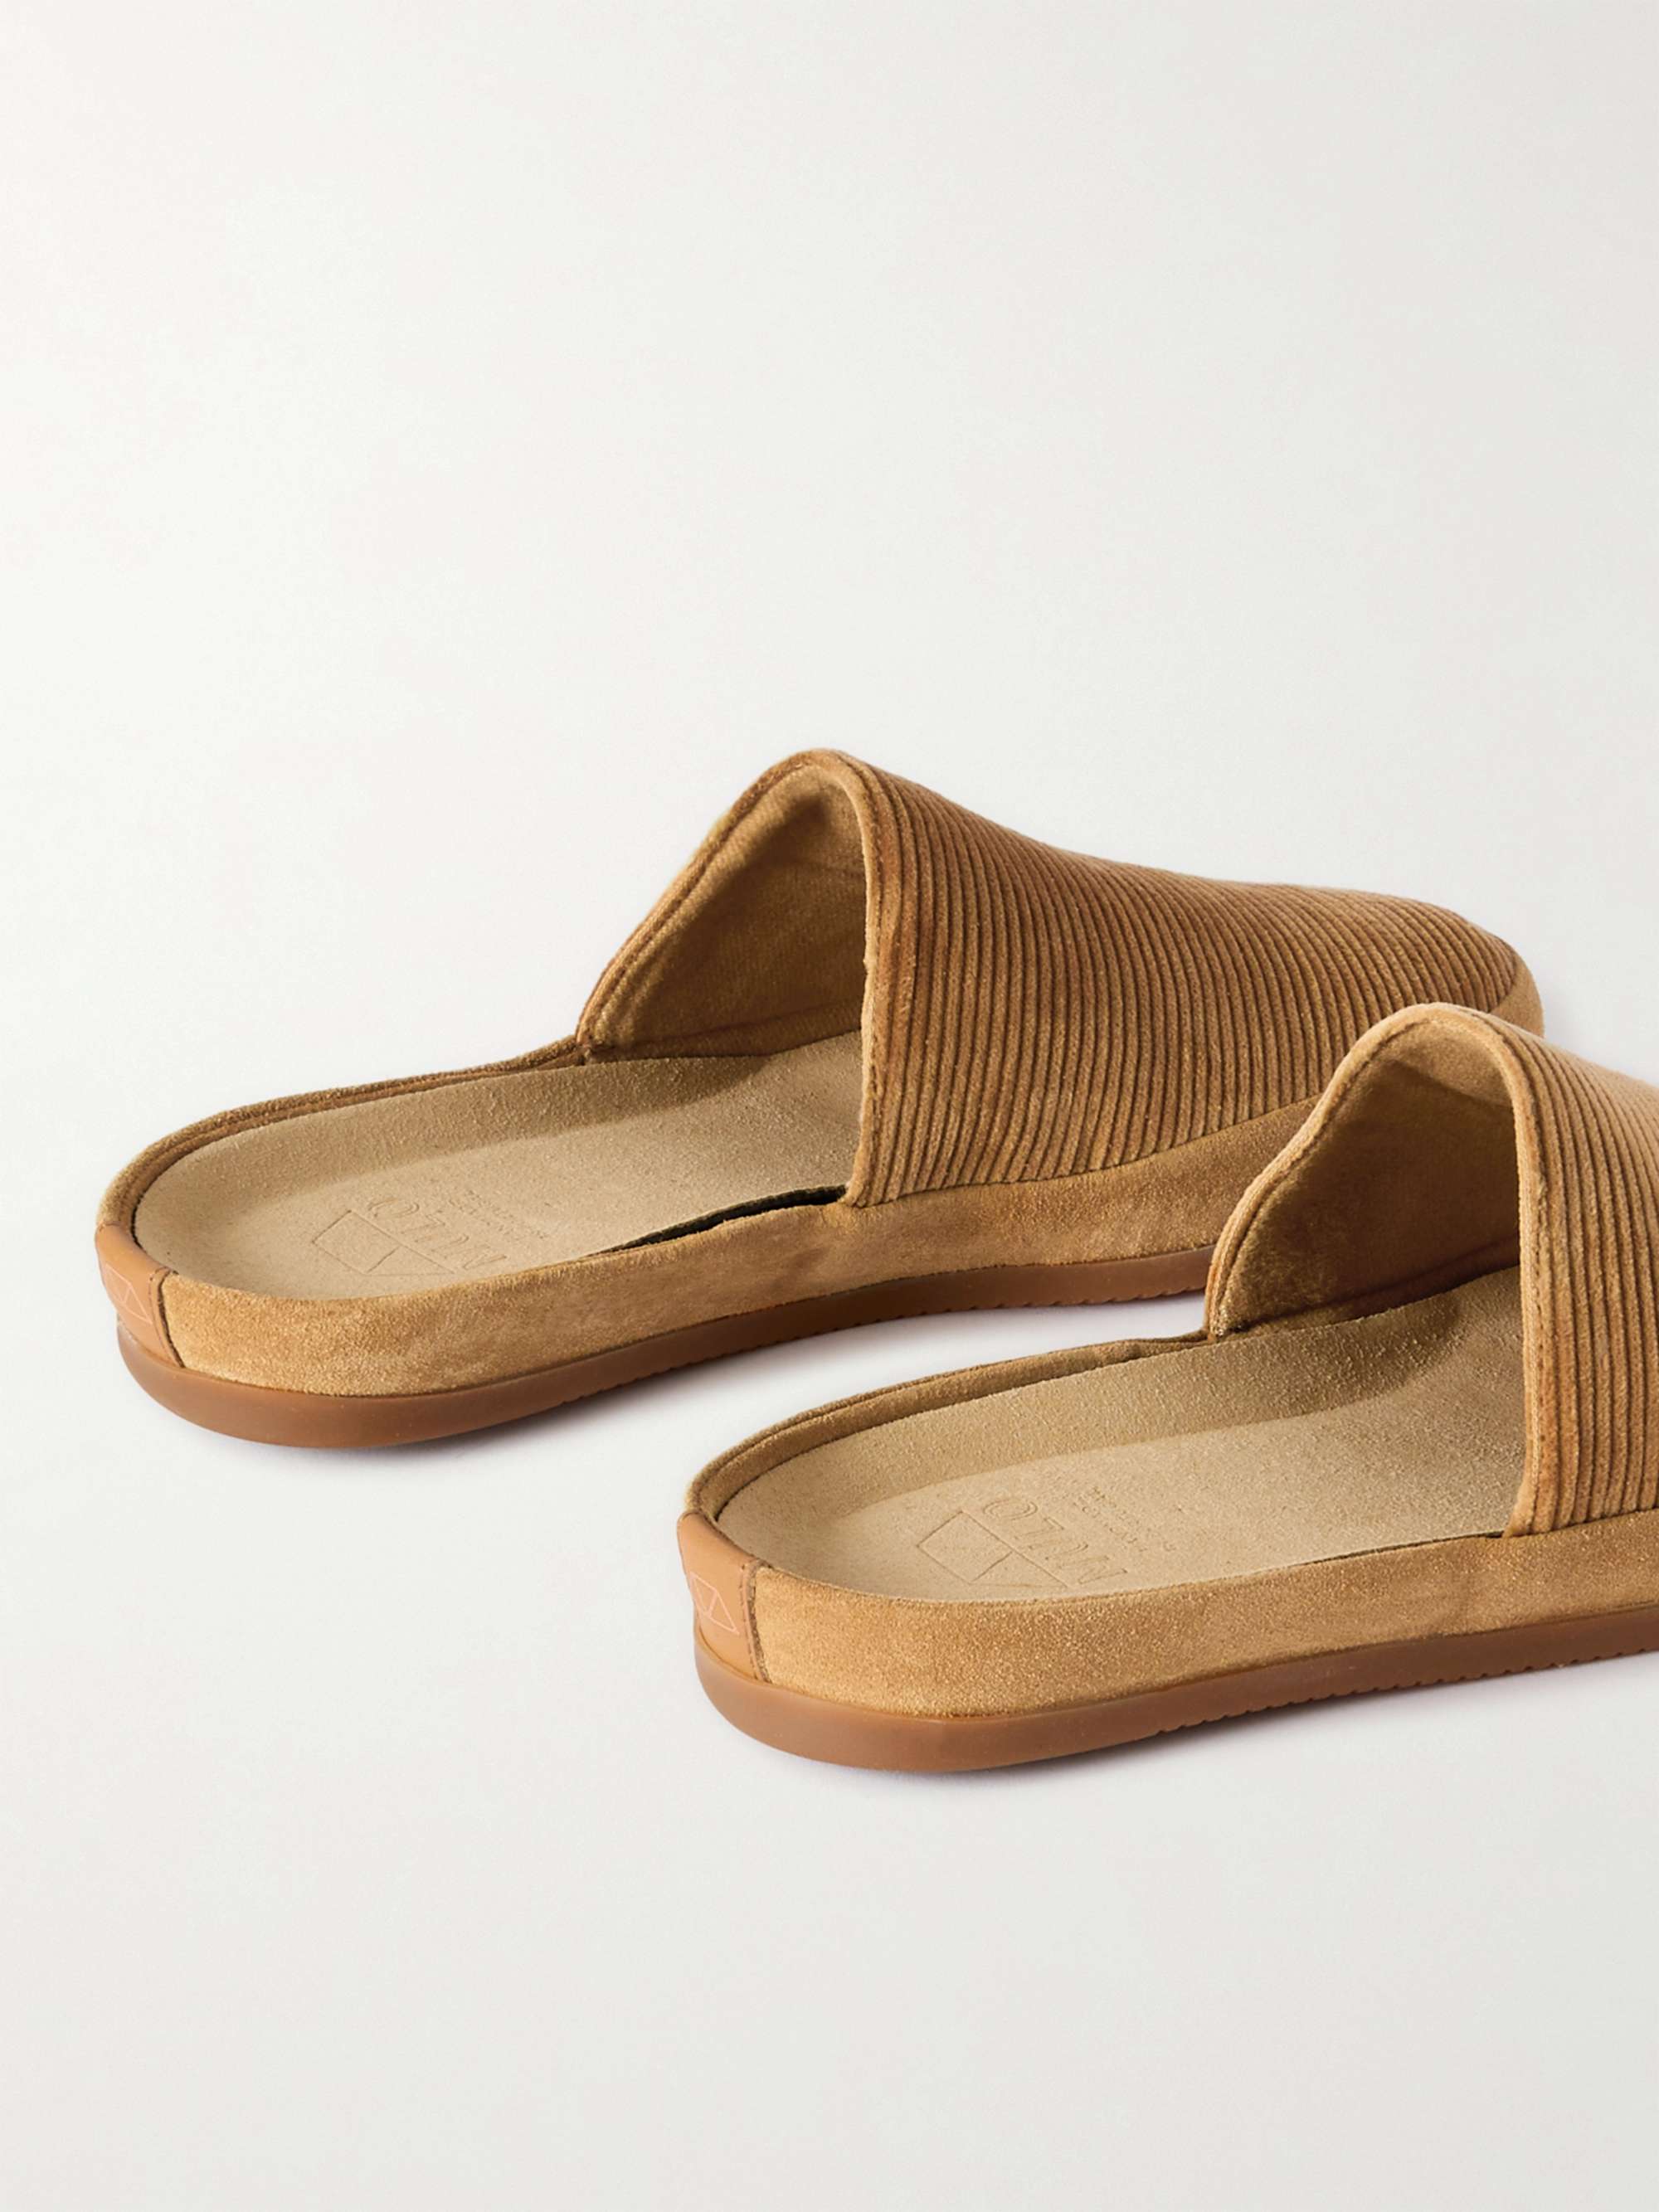 MULO Suede-Trimmed Corduroy Slippers